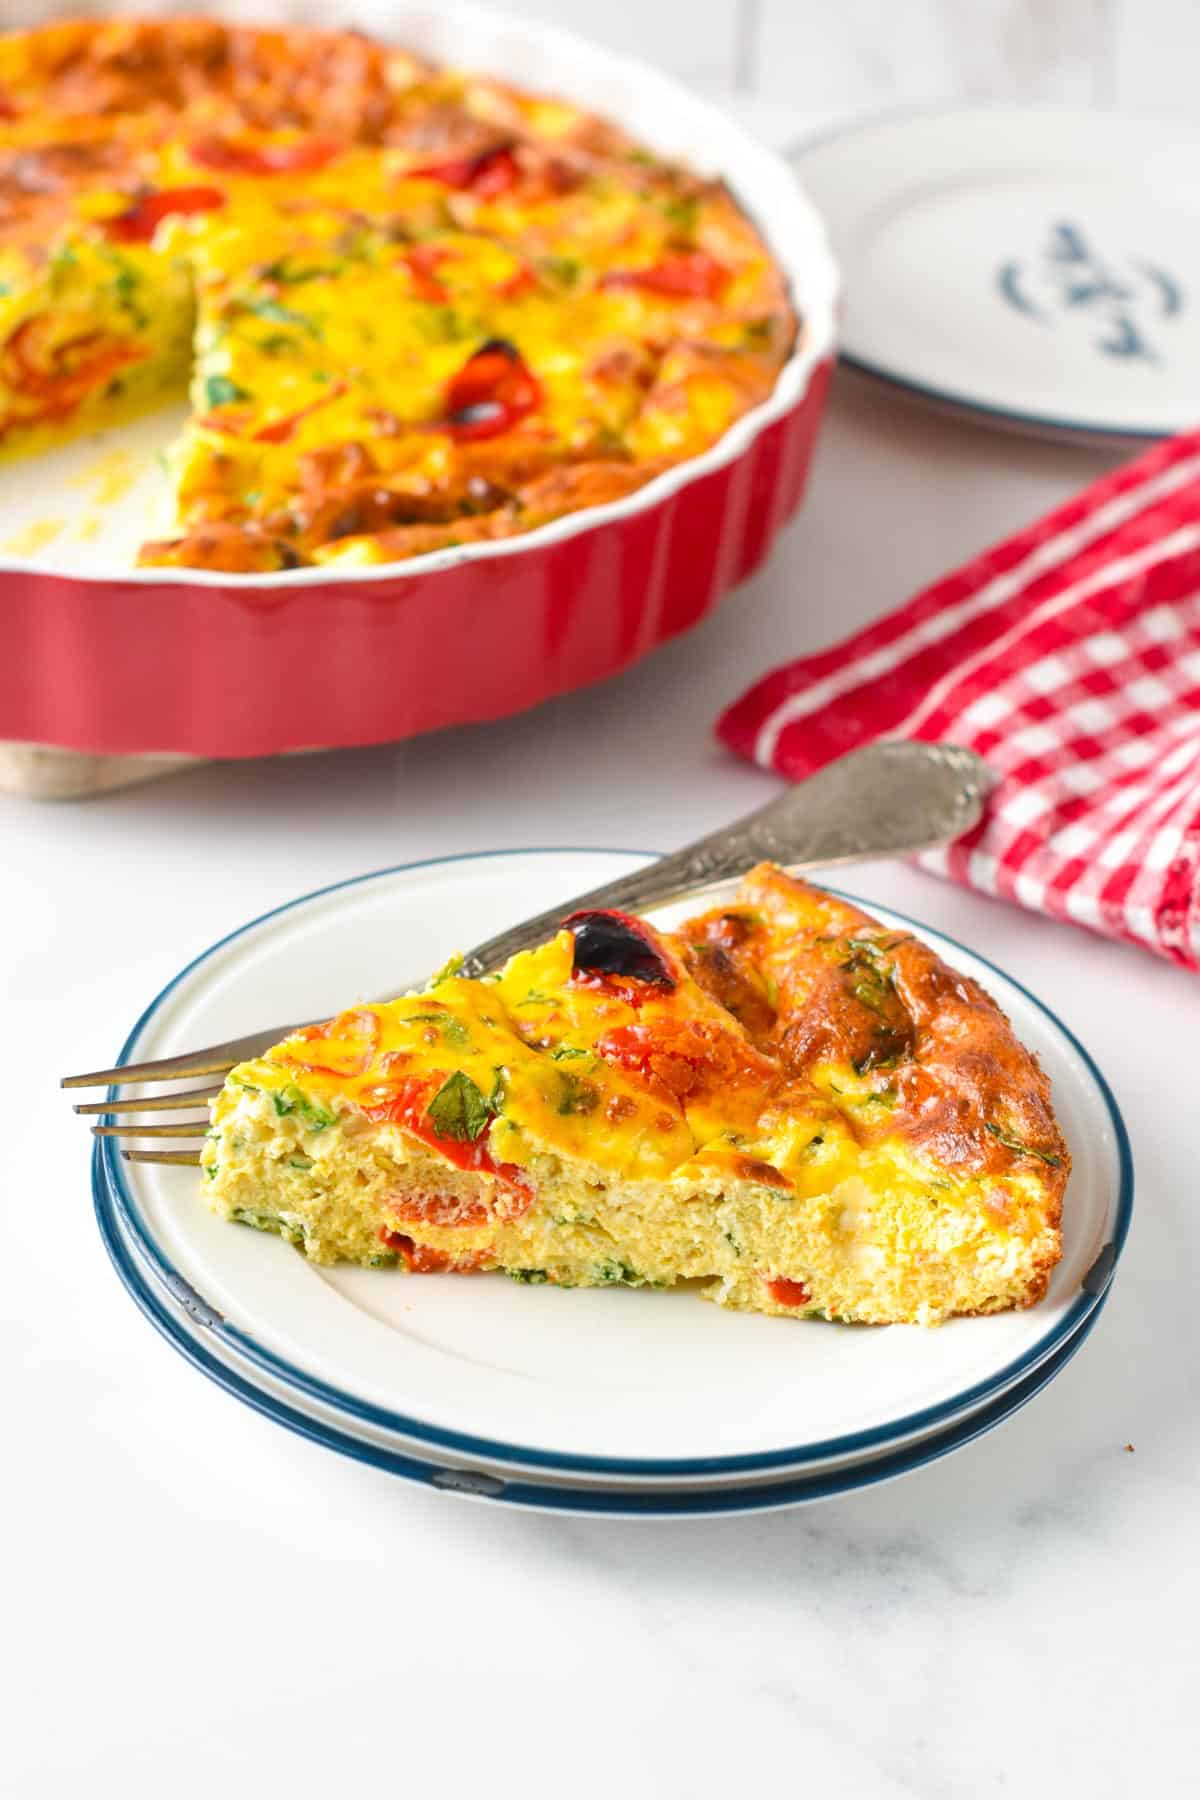 A slice of ricotta frittata filled with spinach and roasted red bell pepper.